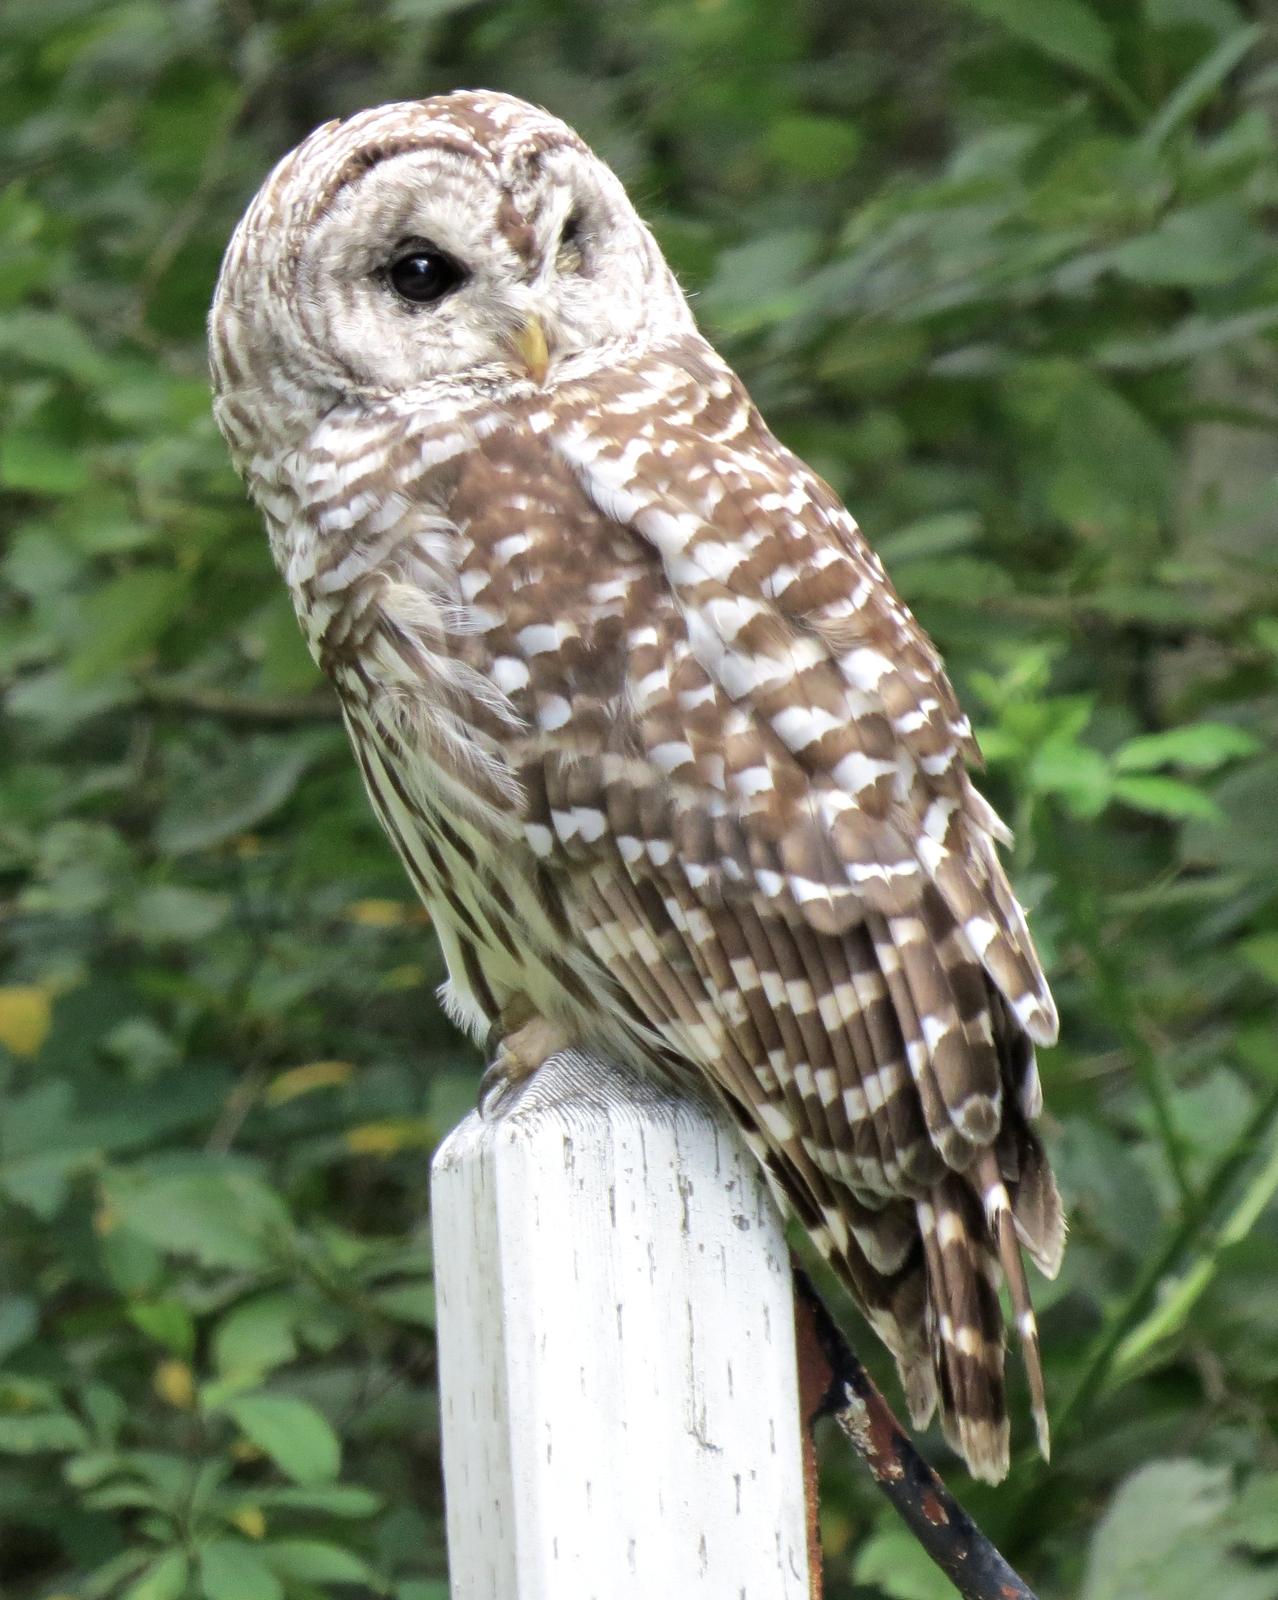 Barred Owl Photo by Robin Barker